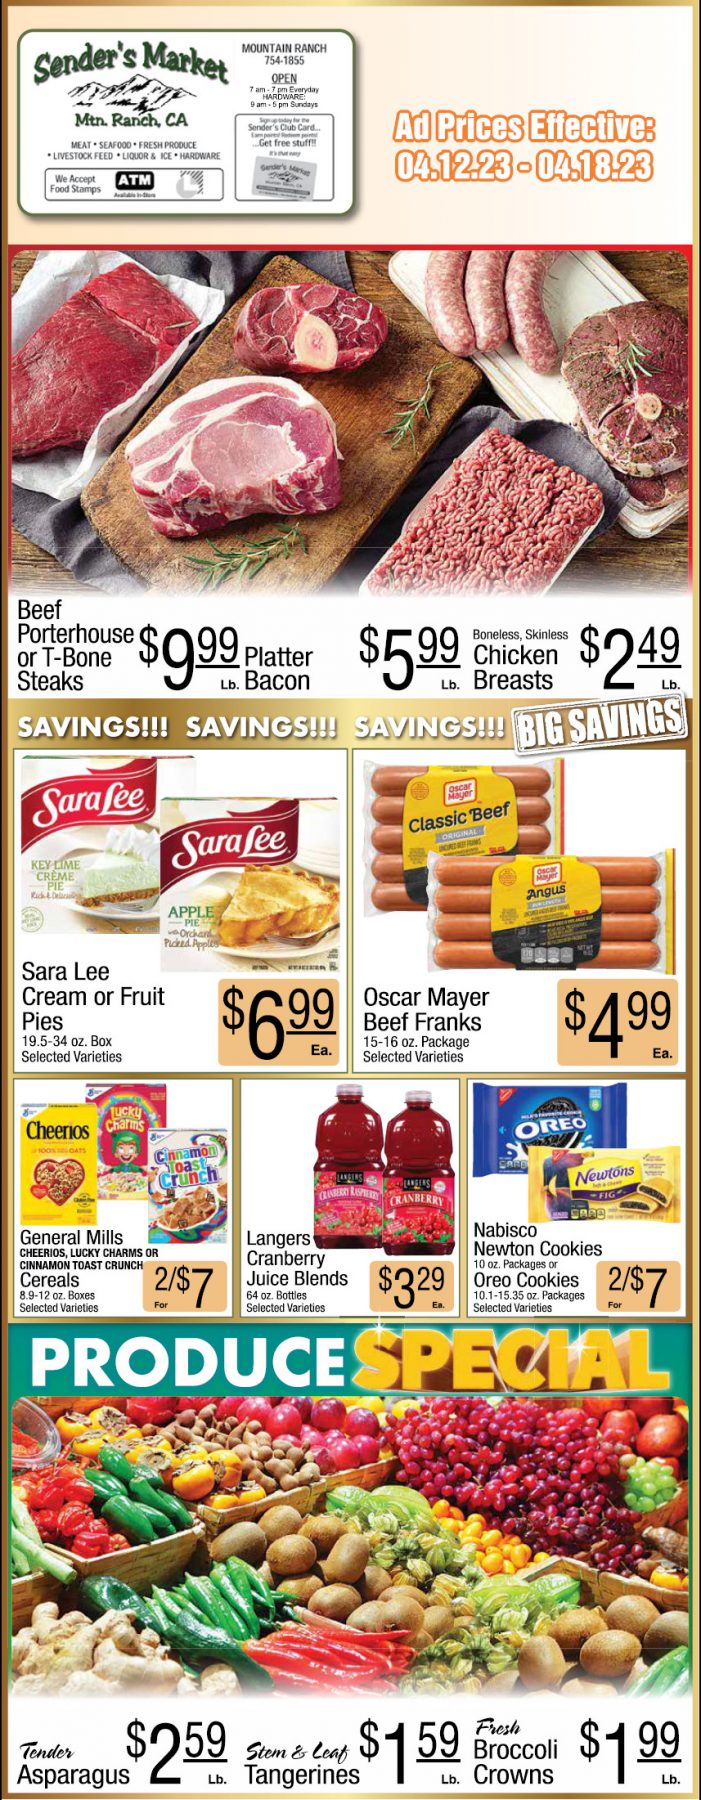 Sender’s Market Weekly Ad & Grocery Specials April 12 – 18!  Shop Local & Save!!